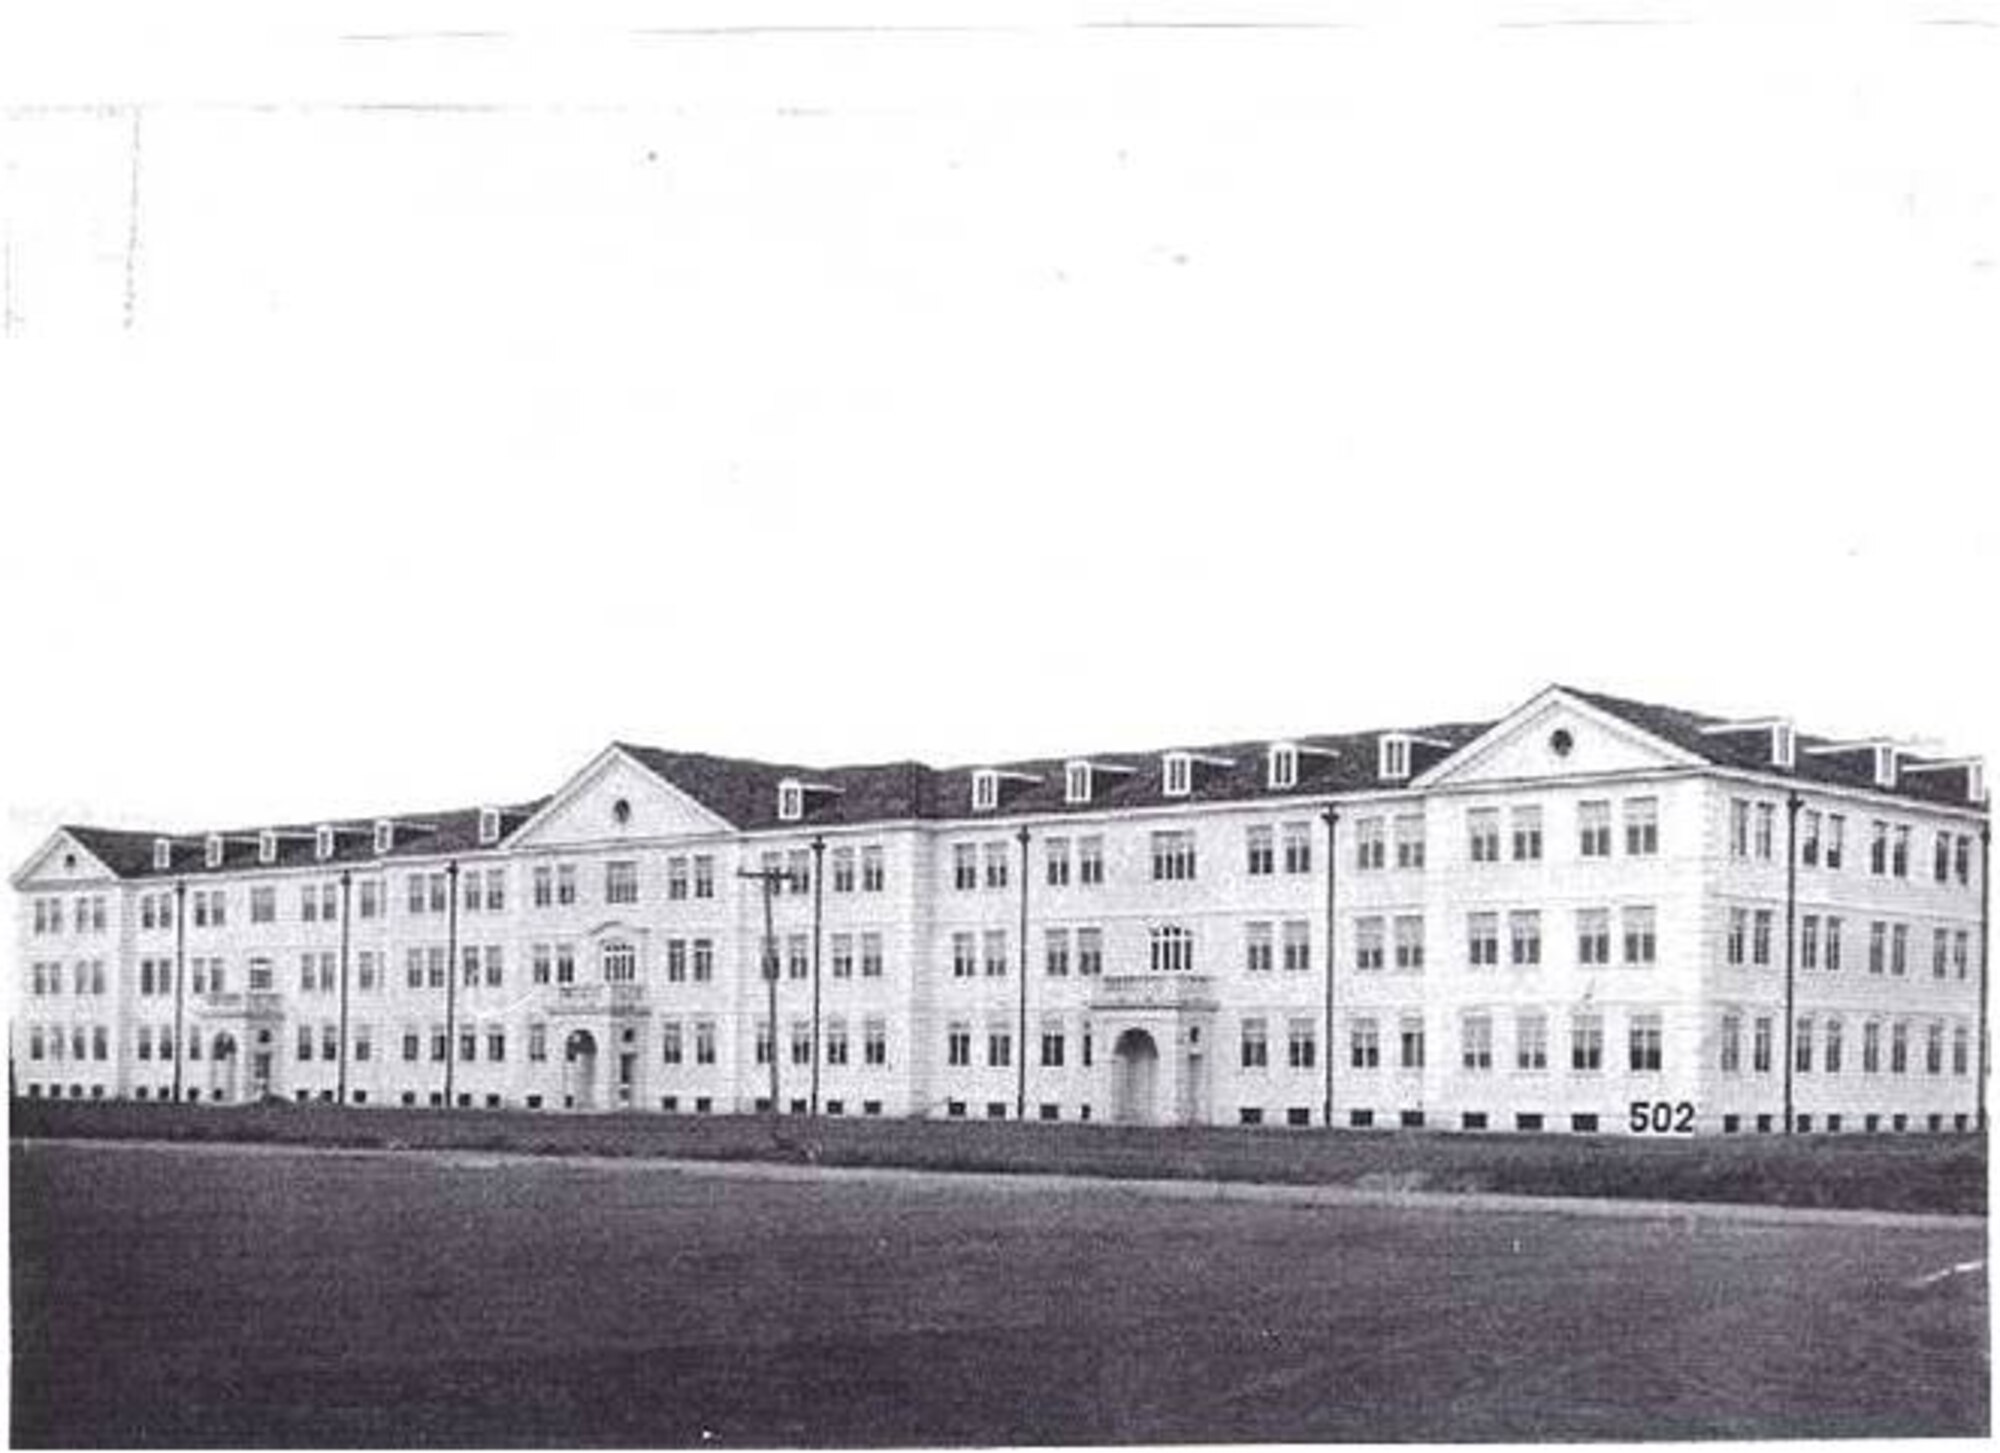 BARKSDALE AIR FORCE BASE, La. – This is how Building 5354 looked in 1934. The building is currently being renovated. A groundbreaking ceremony commemorating the $25 million renovation project was held Oct. 4. The renovations cover more than 77,000 square feet of office space and will transform the building into a 21st Century warfighting headquarters for Eighth Air Force. (Courtesy photo)